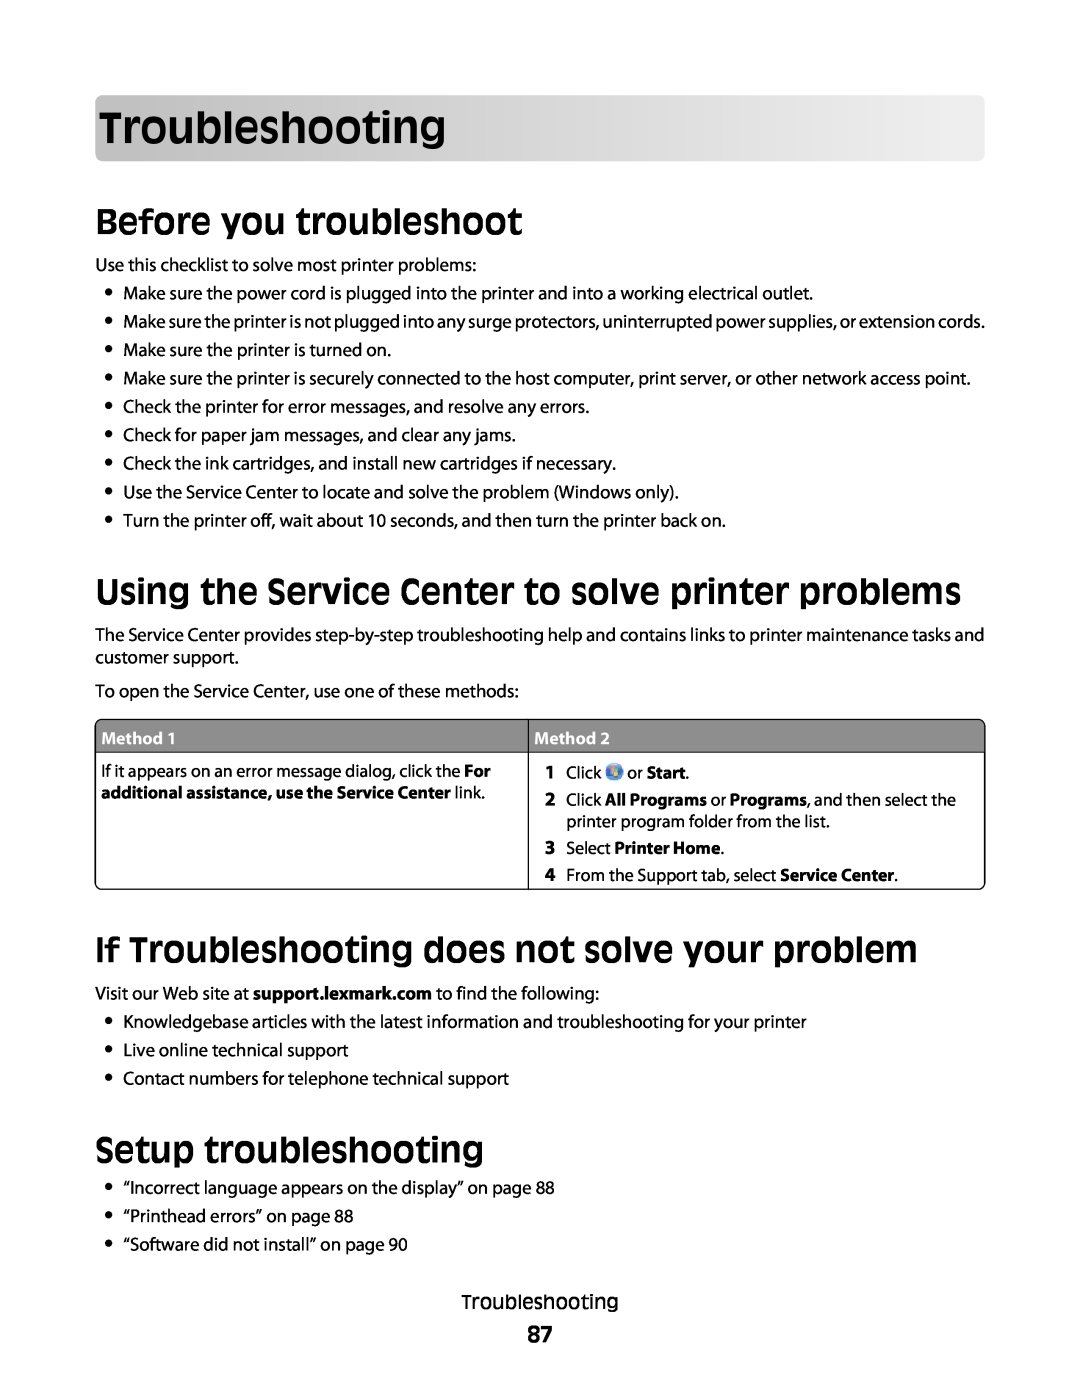 Lexmark 10E, 101 manual Before you troubleshoot, If Troubleshooting does not solve your problem, Setup troubleshooting 